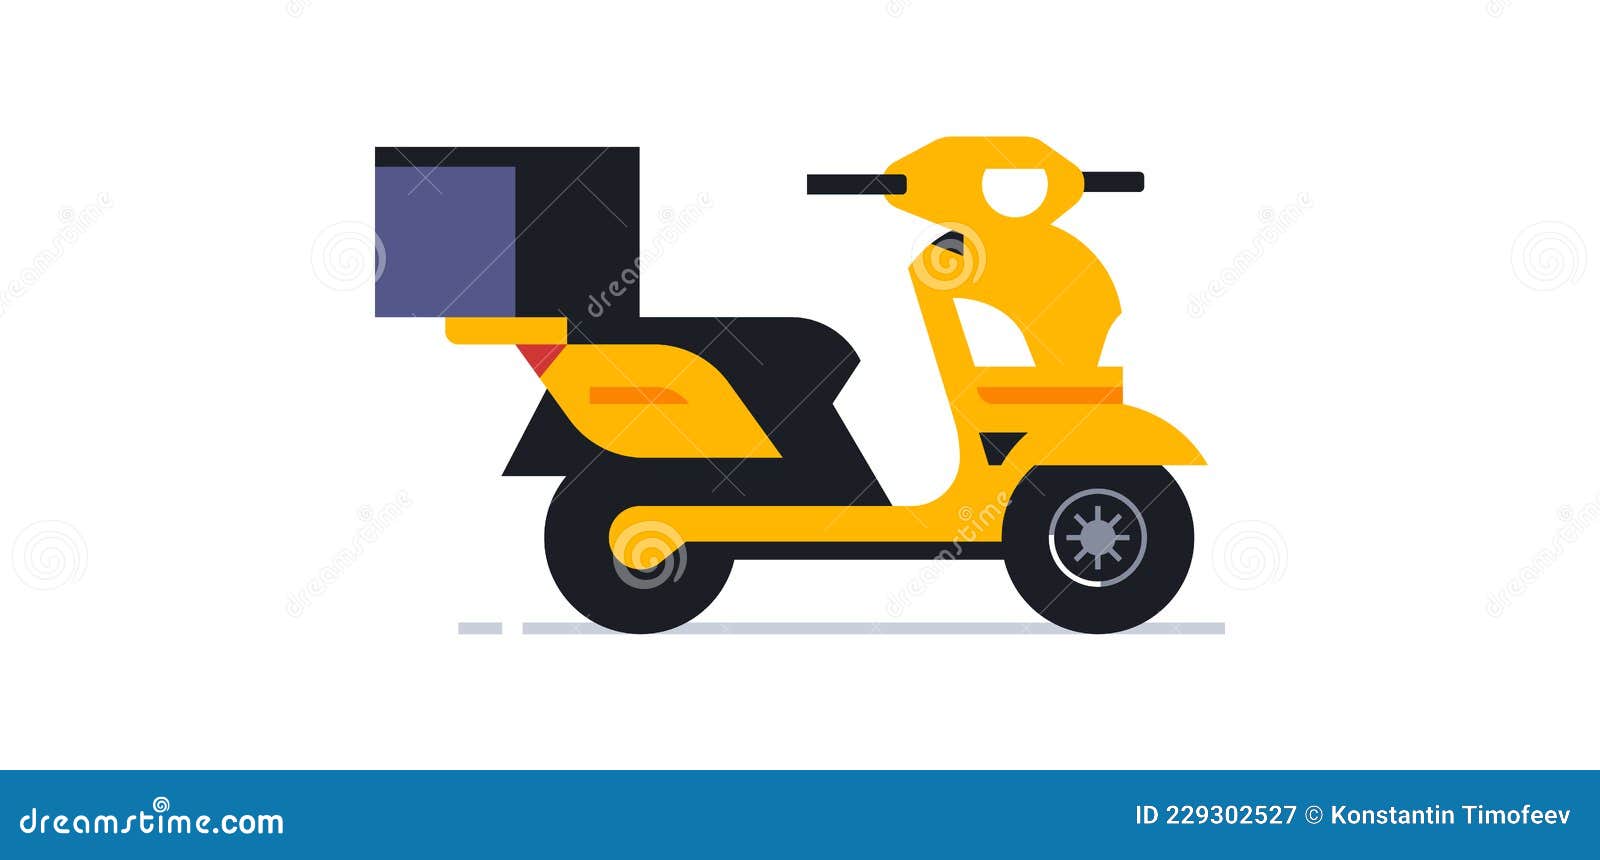 Motorcycle for an Online Home Delivery Service